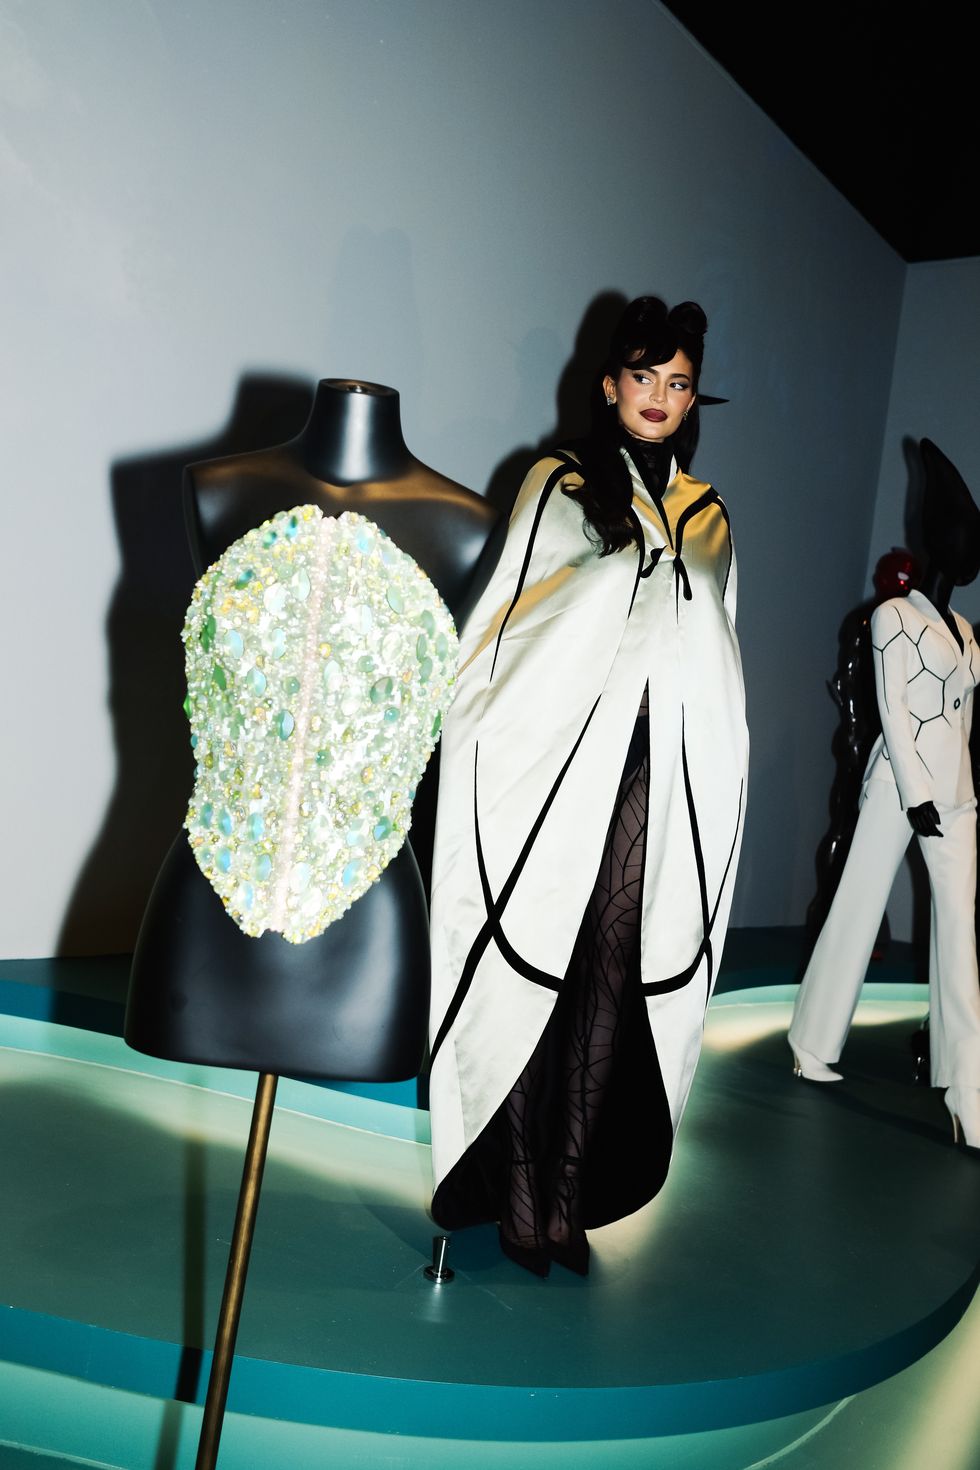 A Look Inside the Mugler Exhibit at the Brooklyn Museum